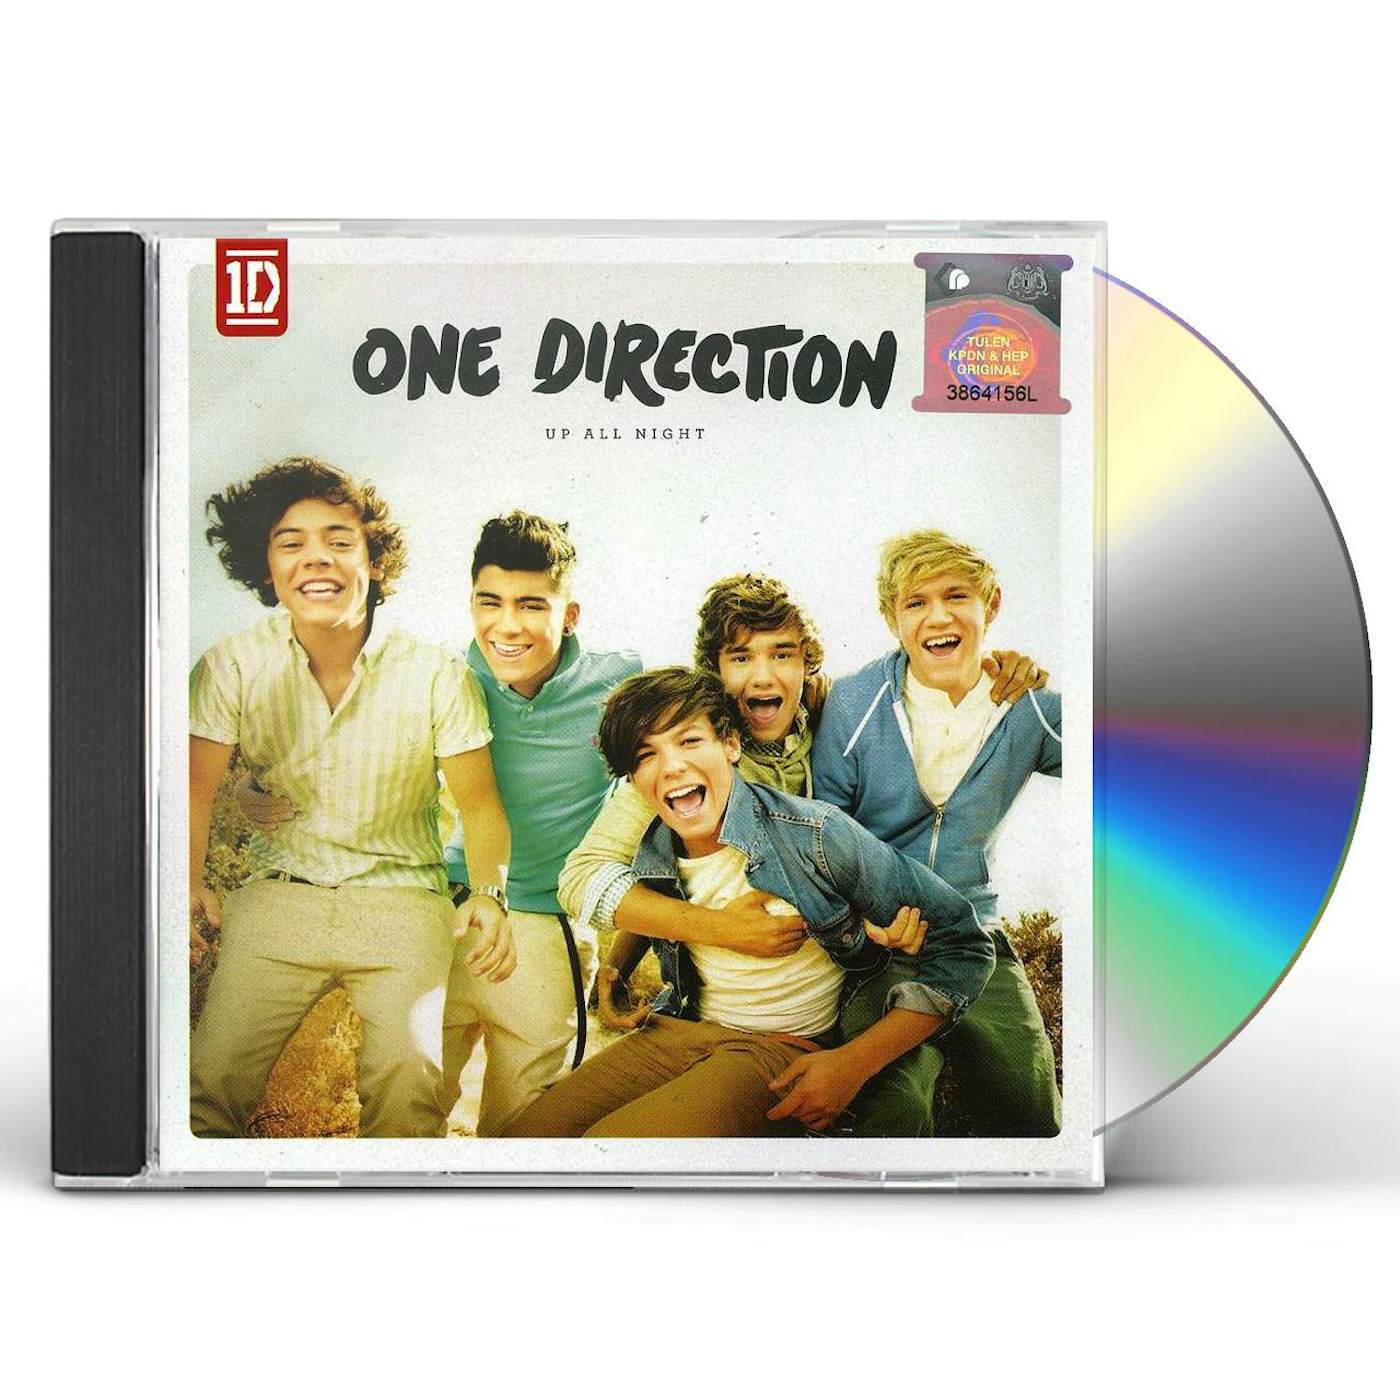 One Direction UP ALL NIGHT: JEWELCASE CD